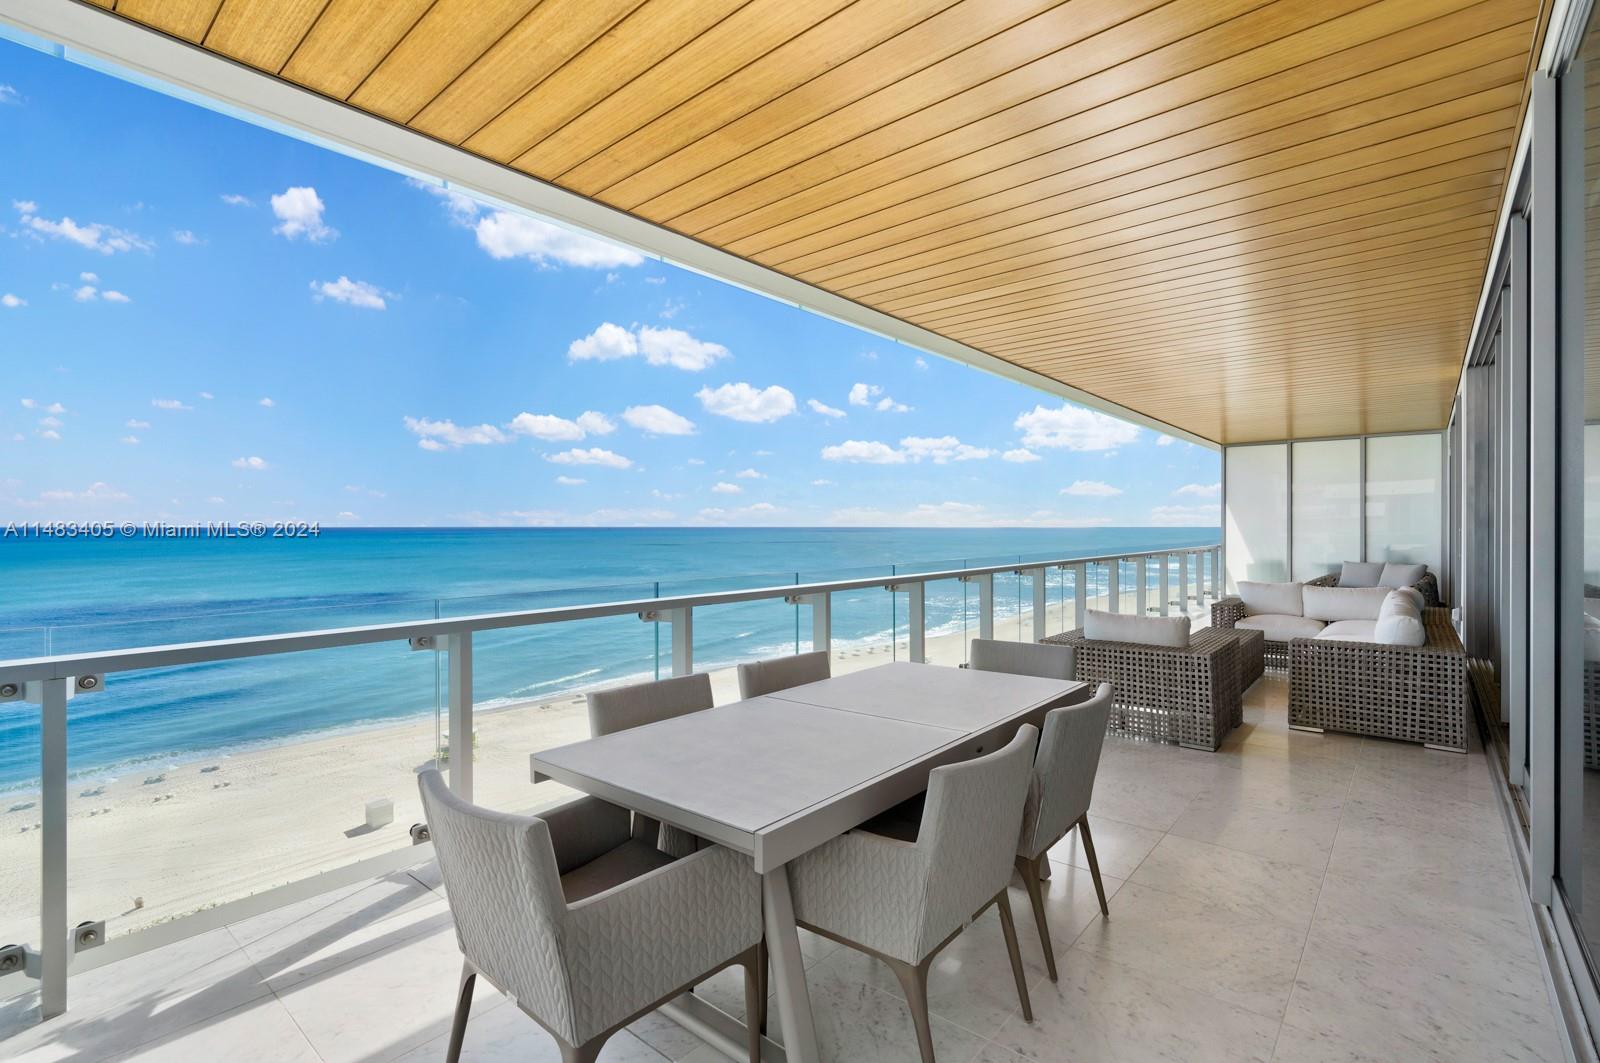 This exclusive oceanfront residence is perched along Millionaire's Row, offering a view of Miami Beach's most beautiful and sought-after stretch of beachfront. 57 Ocean comprises 70 luxury residences with floor-to-ceiling windows, spacious 12ft deep terraces & private elevator foyers. Unit 1203 is a haven of elegance & sophistication, collaboratively designed by Debbie Kalimian & Stephanie Cohen. Herringbone wood flooring throughout & custom Poliform closets grace the bathrooms, kitchen & pantry. Bathrooms are outfitted with luxurious Axor fixtures and kitchen is complete with SubZero & Wolf appliances. The unit is equipped with a SAVANT smart home system.  This flow-through design spans the entire NE corner, offering breathtaking ocean-to-intracoastal views, redefining luxury living.